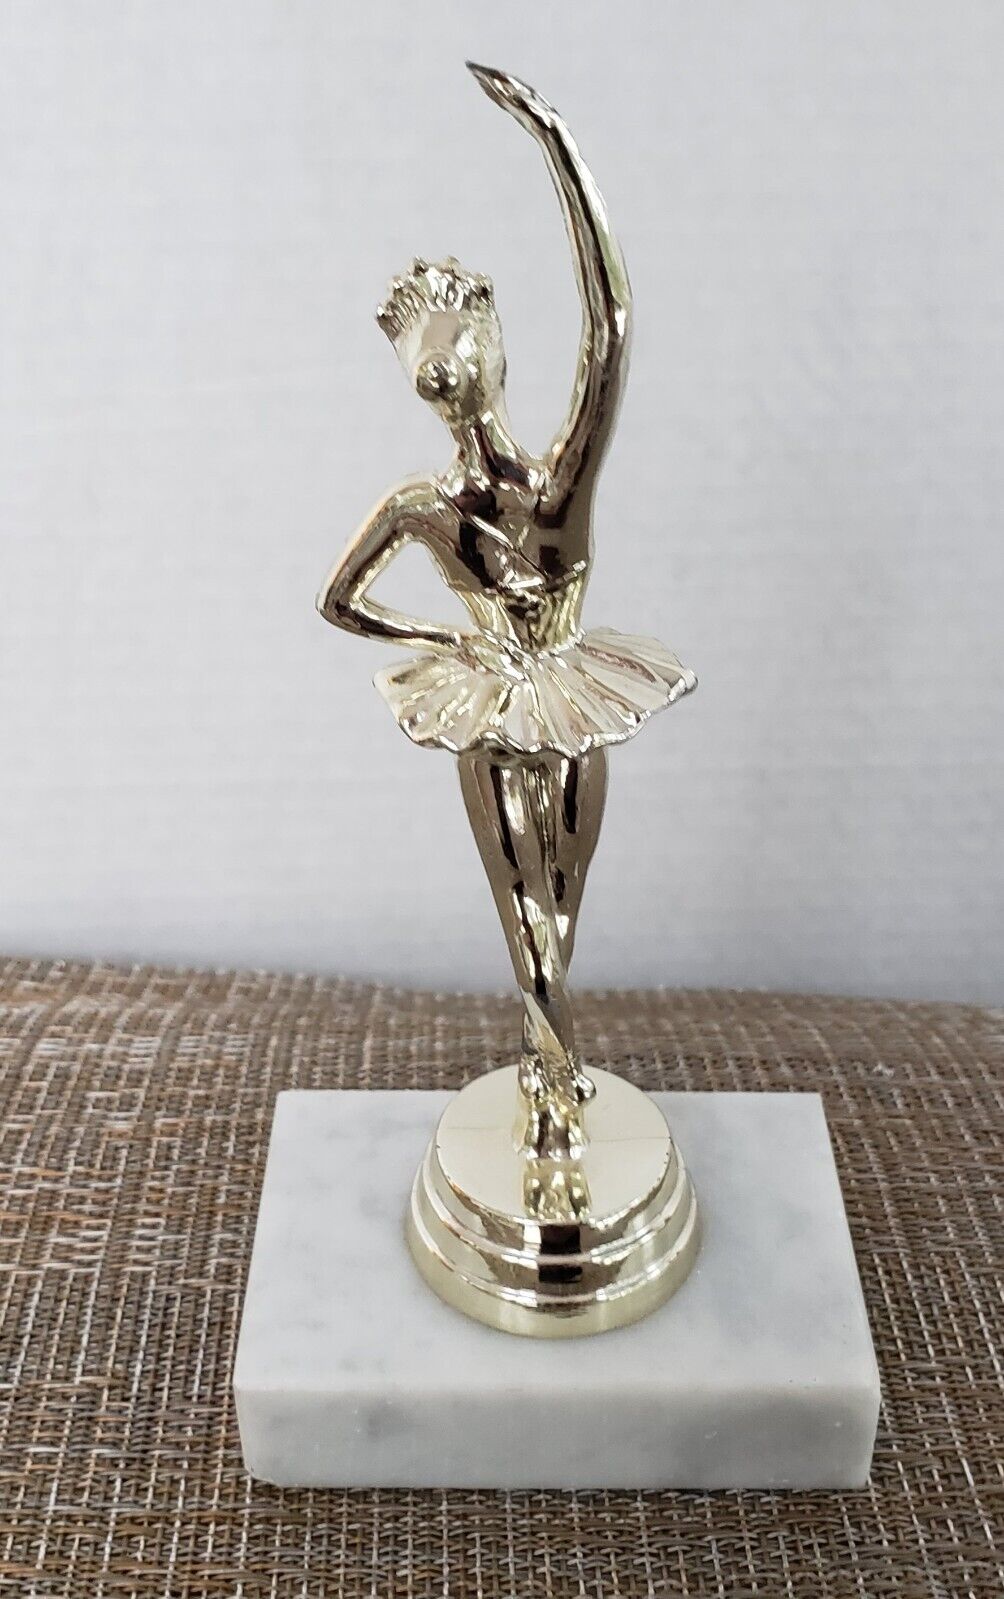  Ballerina Dancer Trophy Unengraved With Mable Base Italy 6.5 Tall Very Nice